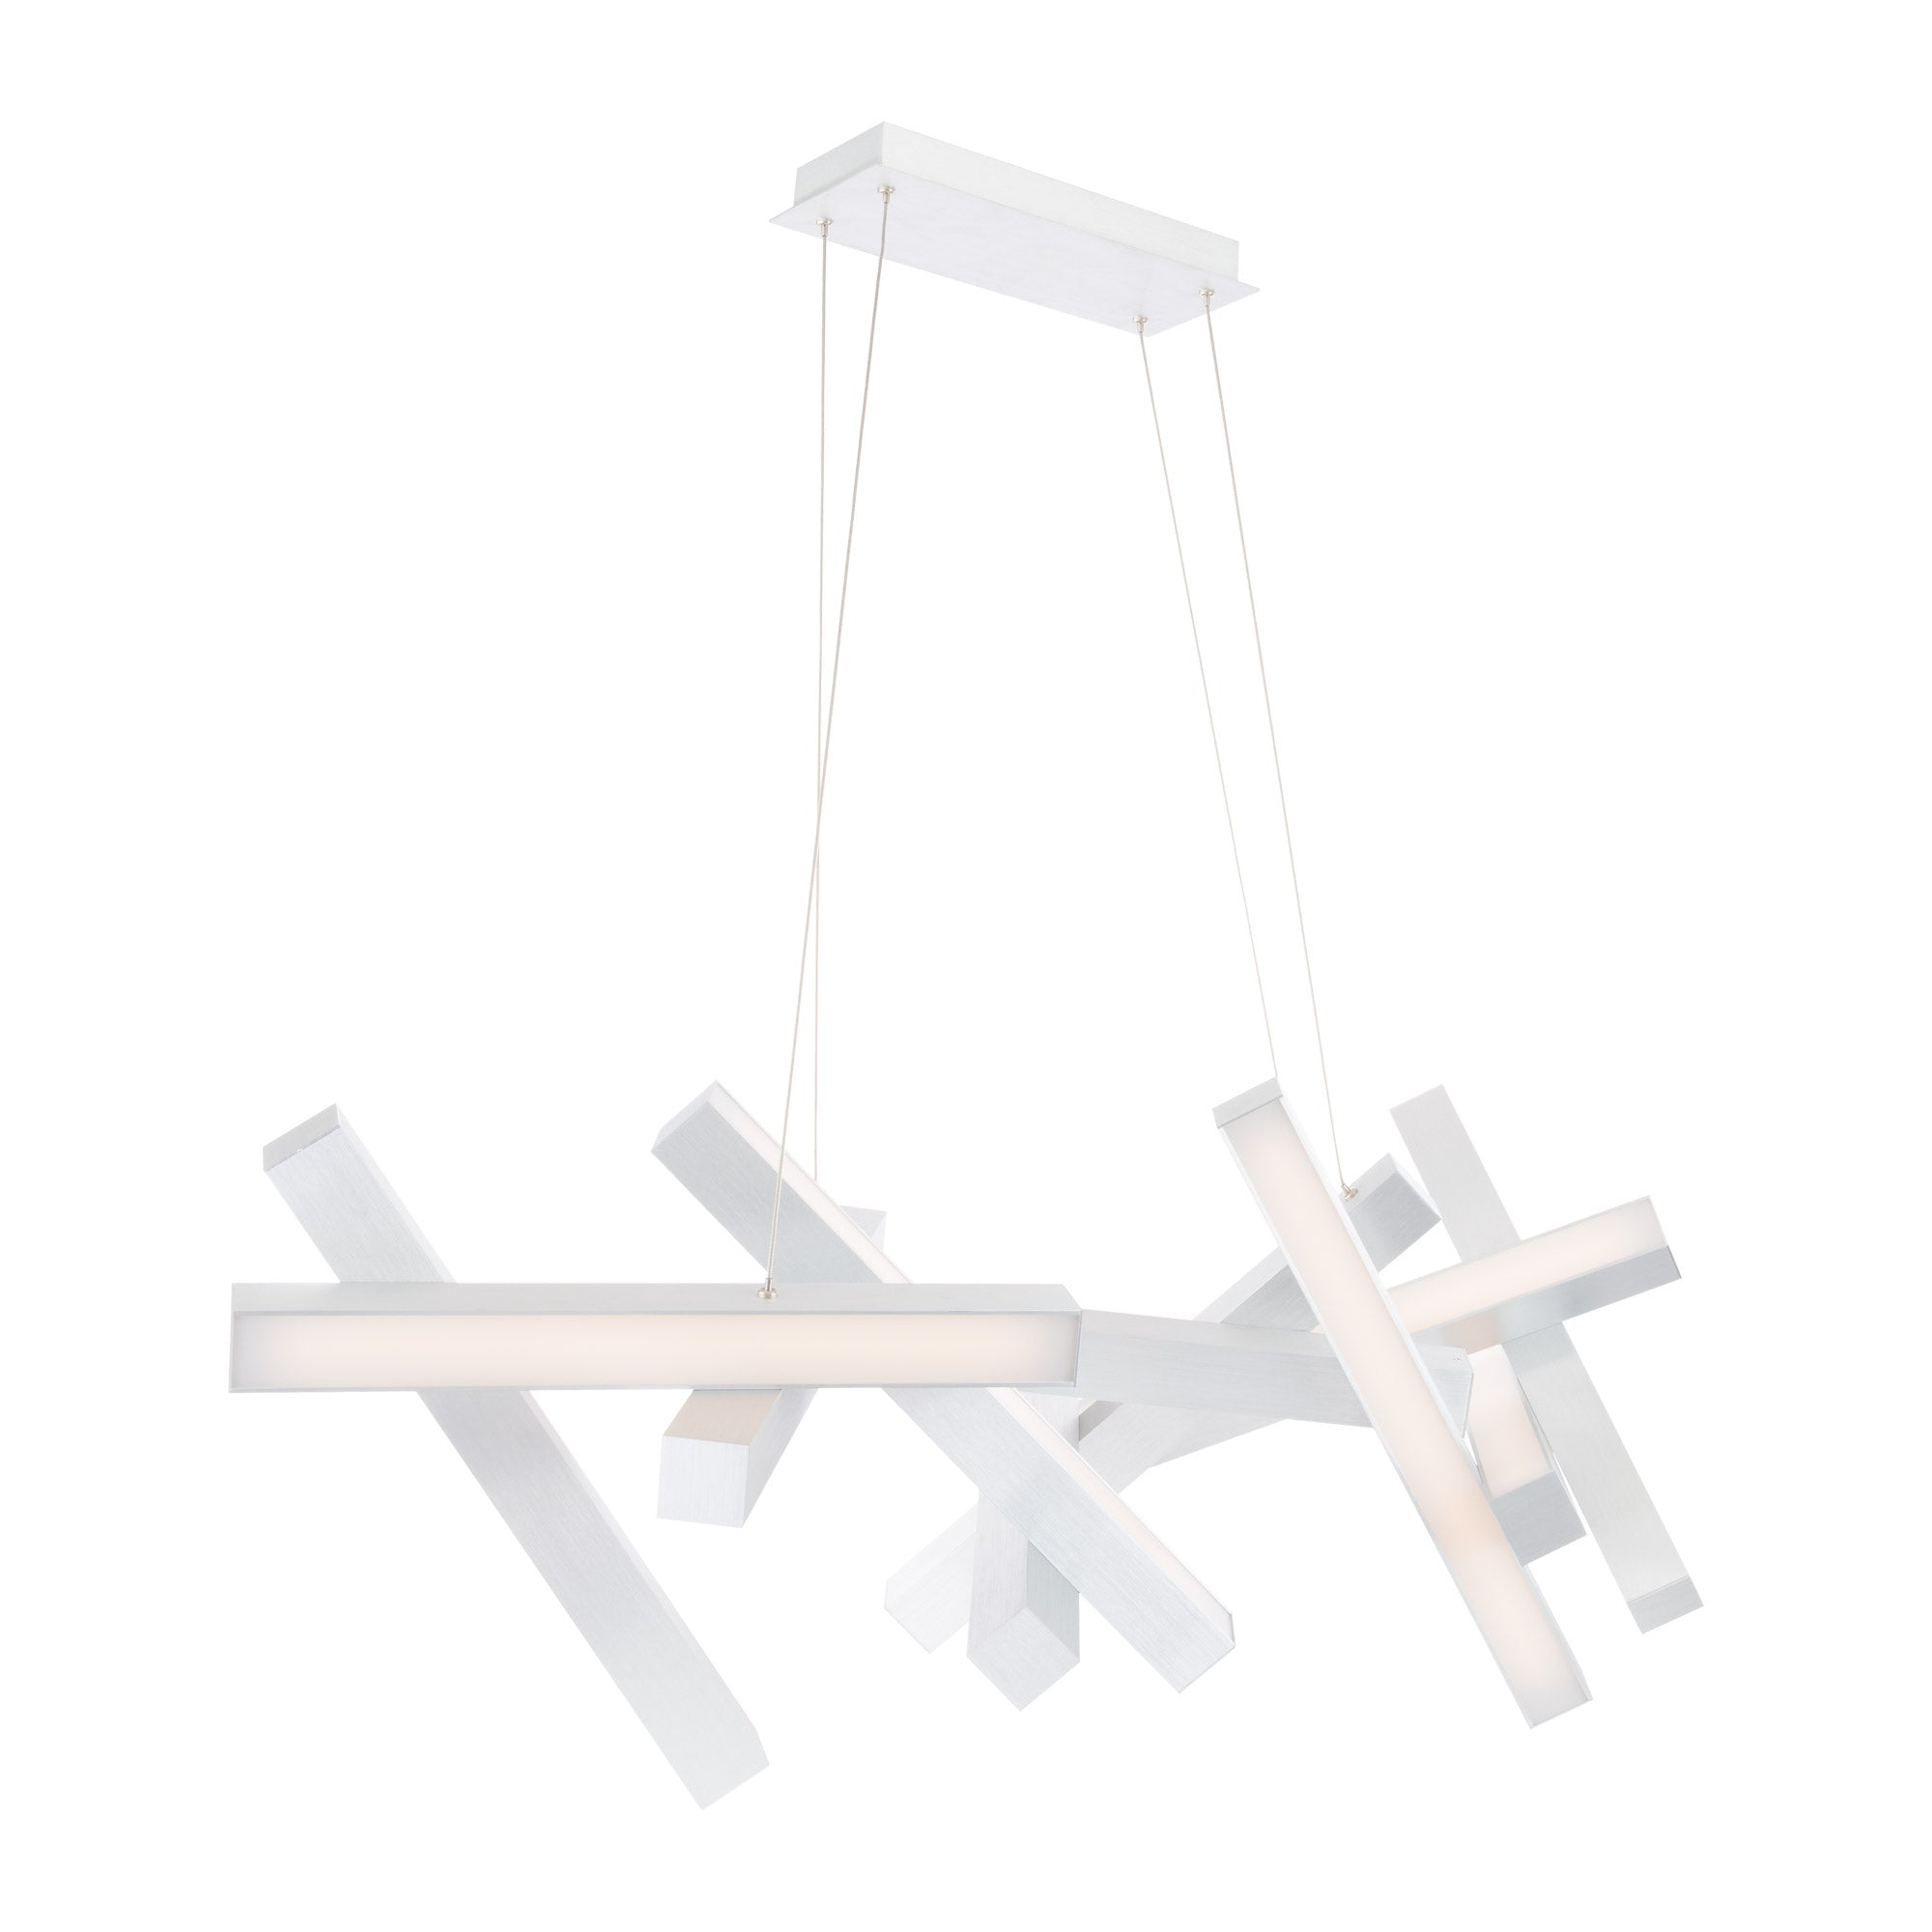 CHAOS Chandelier Aluminum INTEGRATED LED - PD-64848-AL | MODERN FORMS